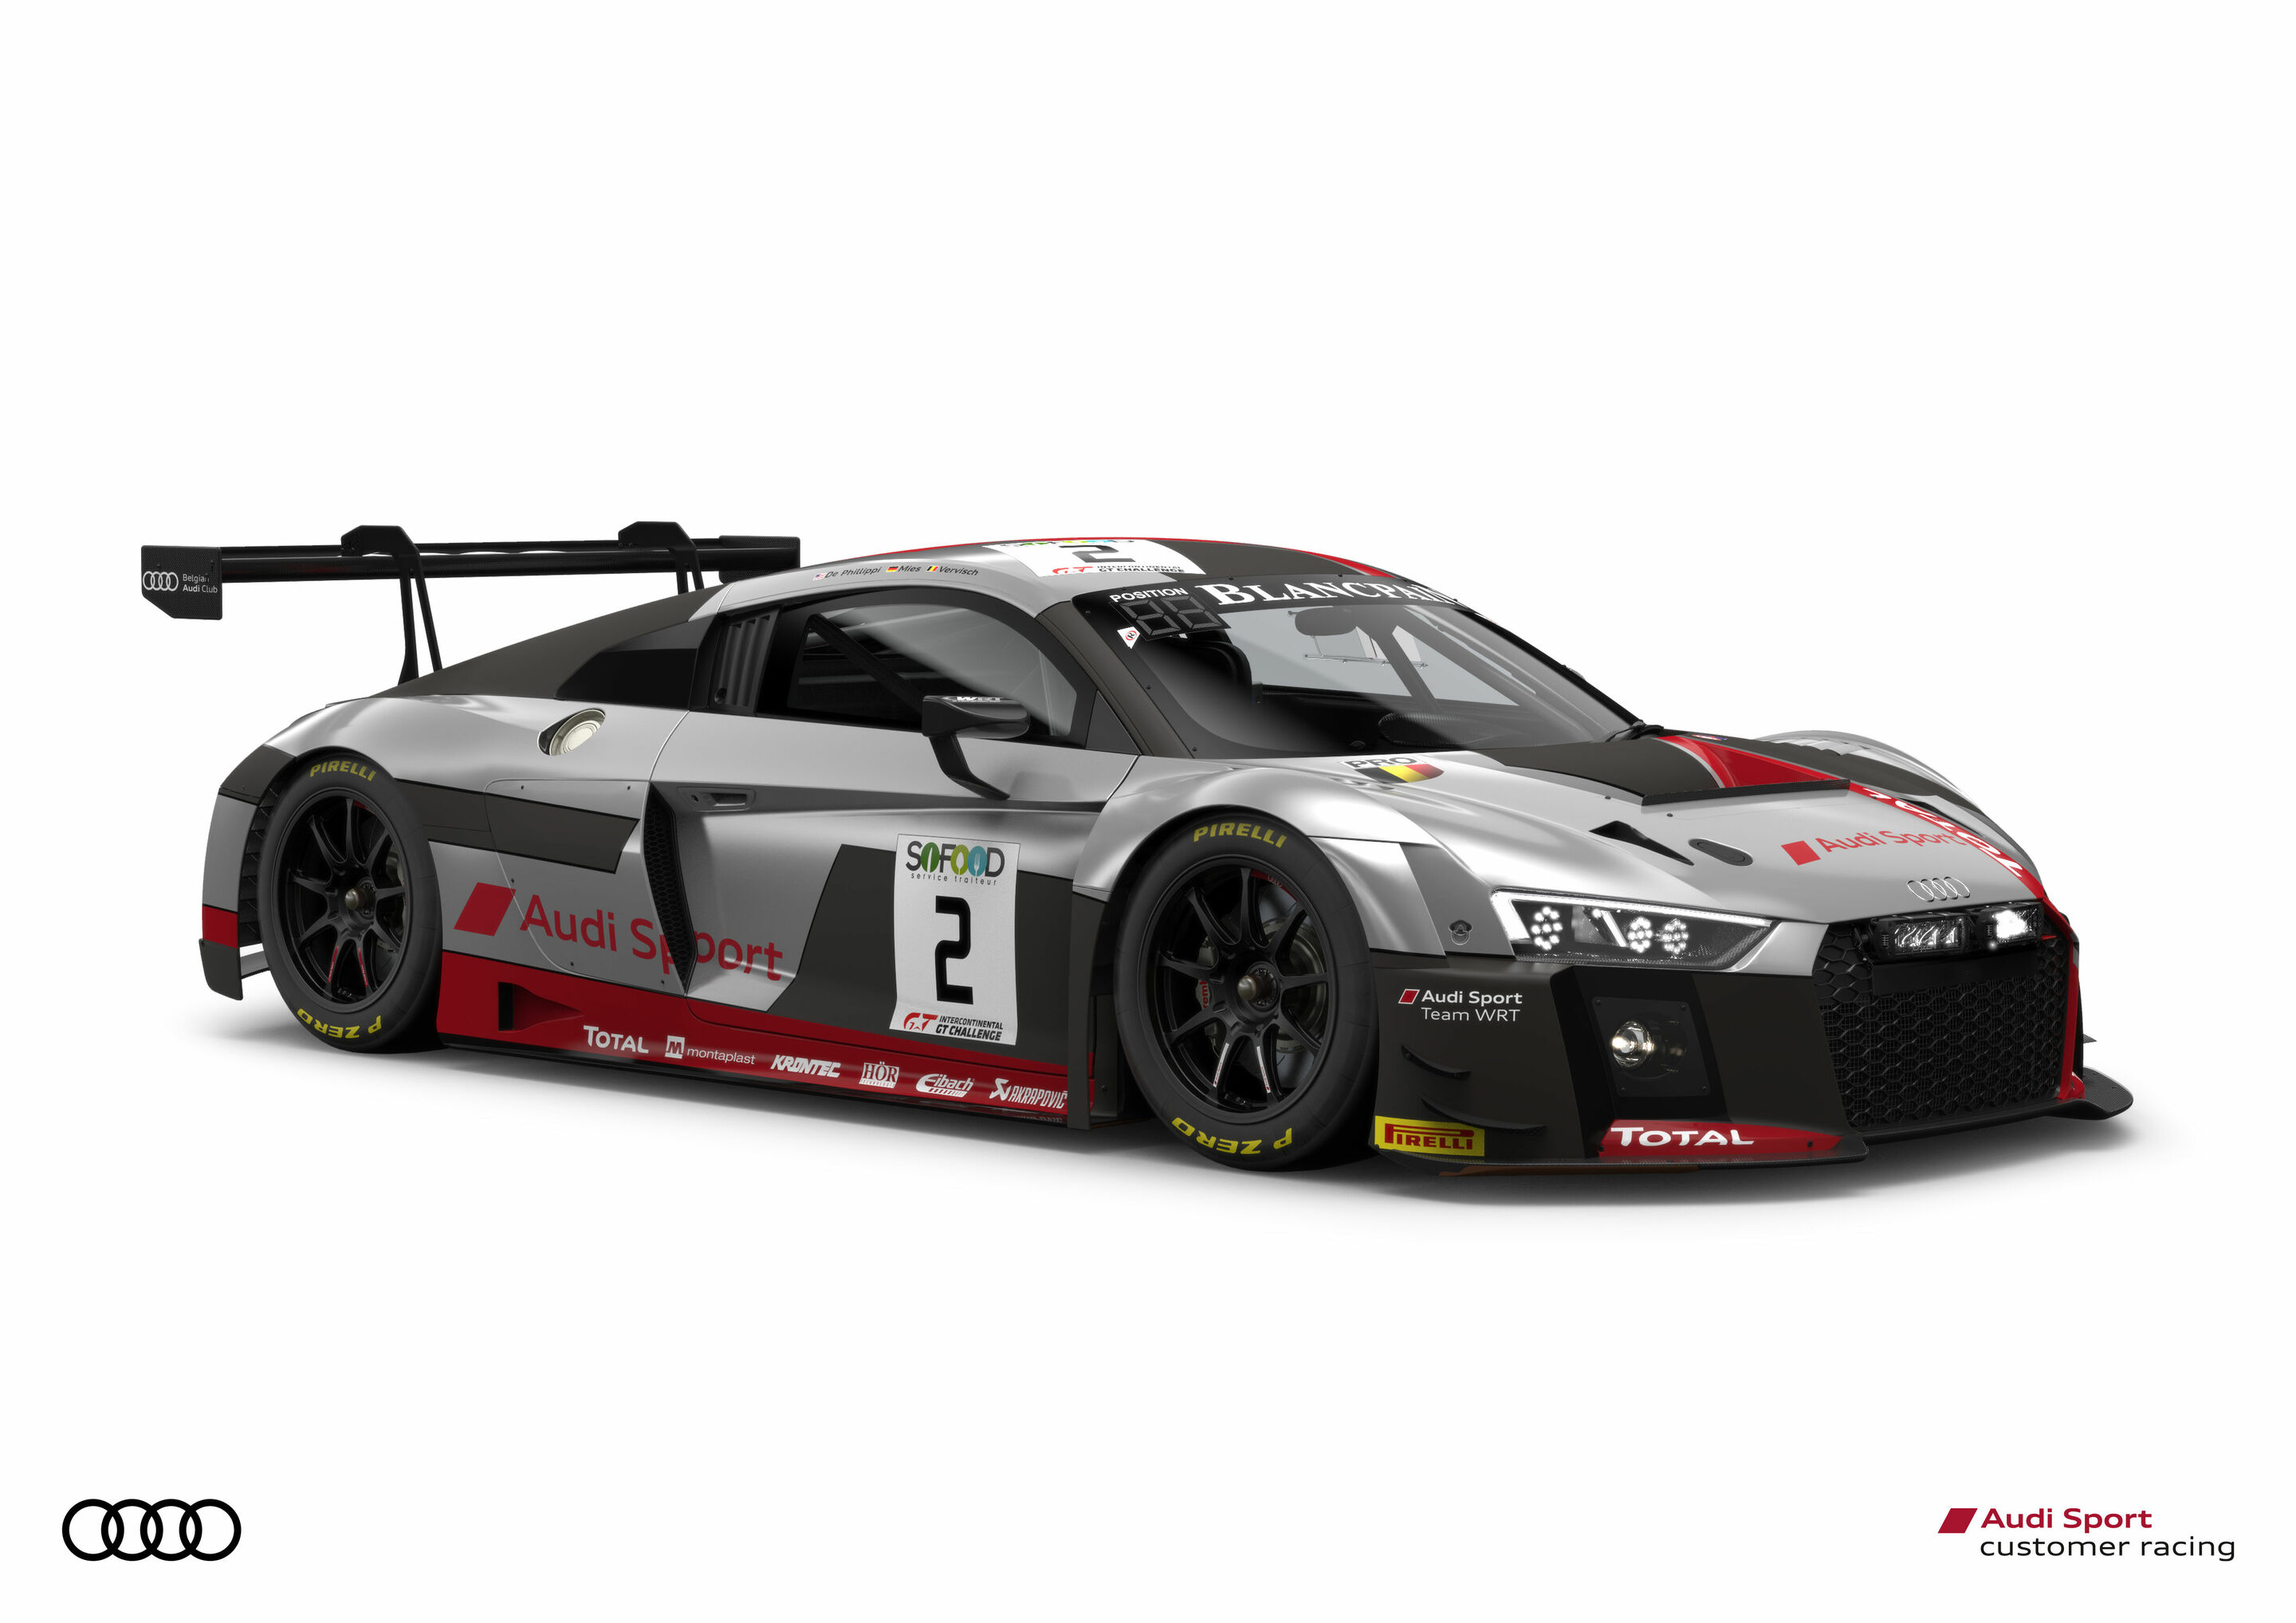 Audi aims for fifth victory in Spa 24 Hours